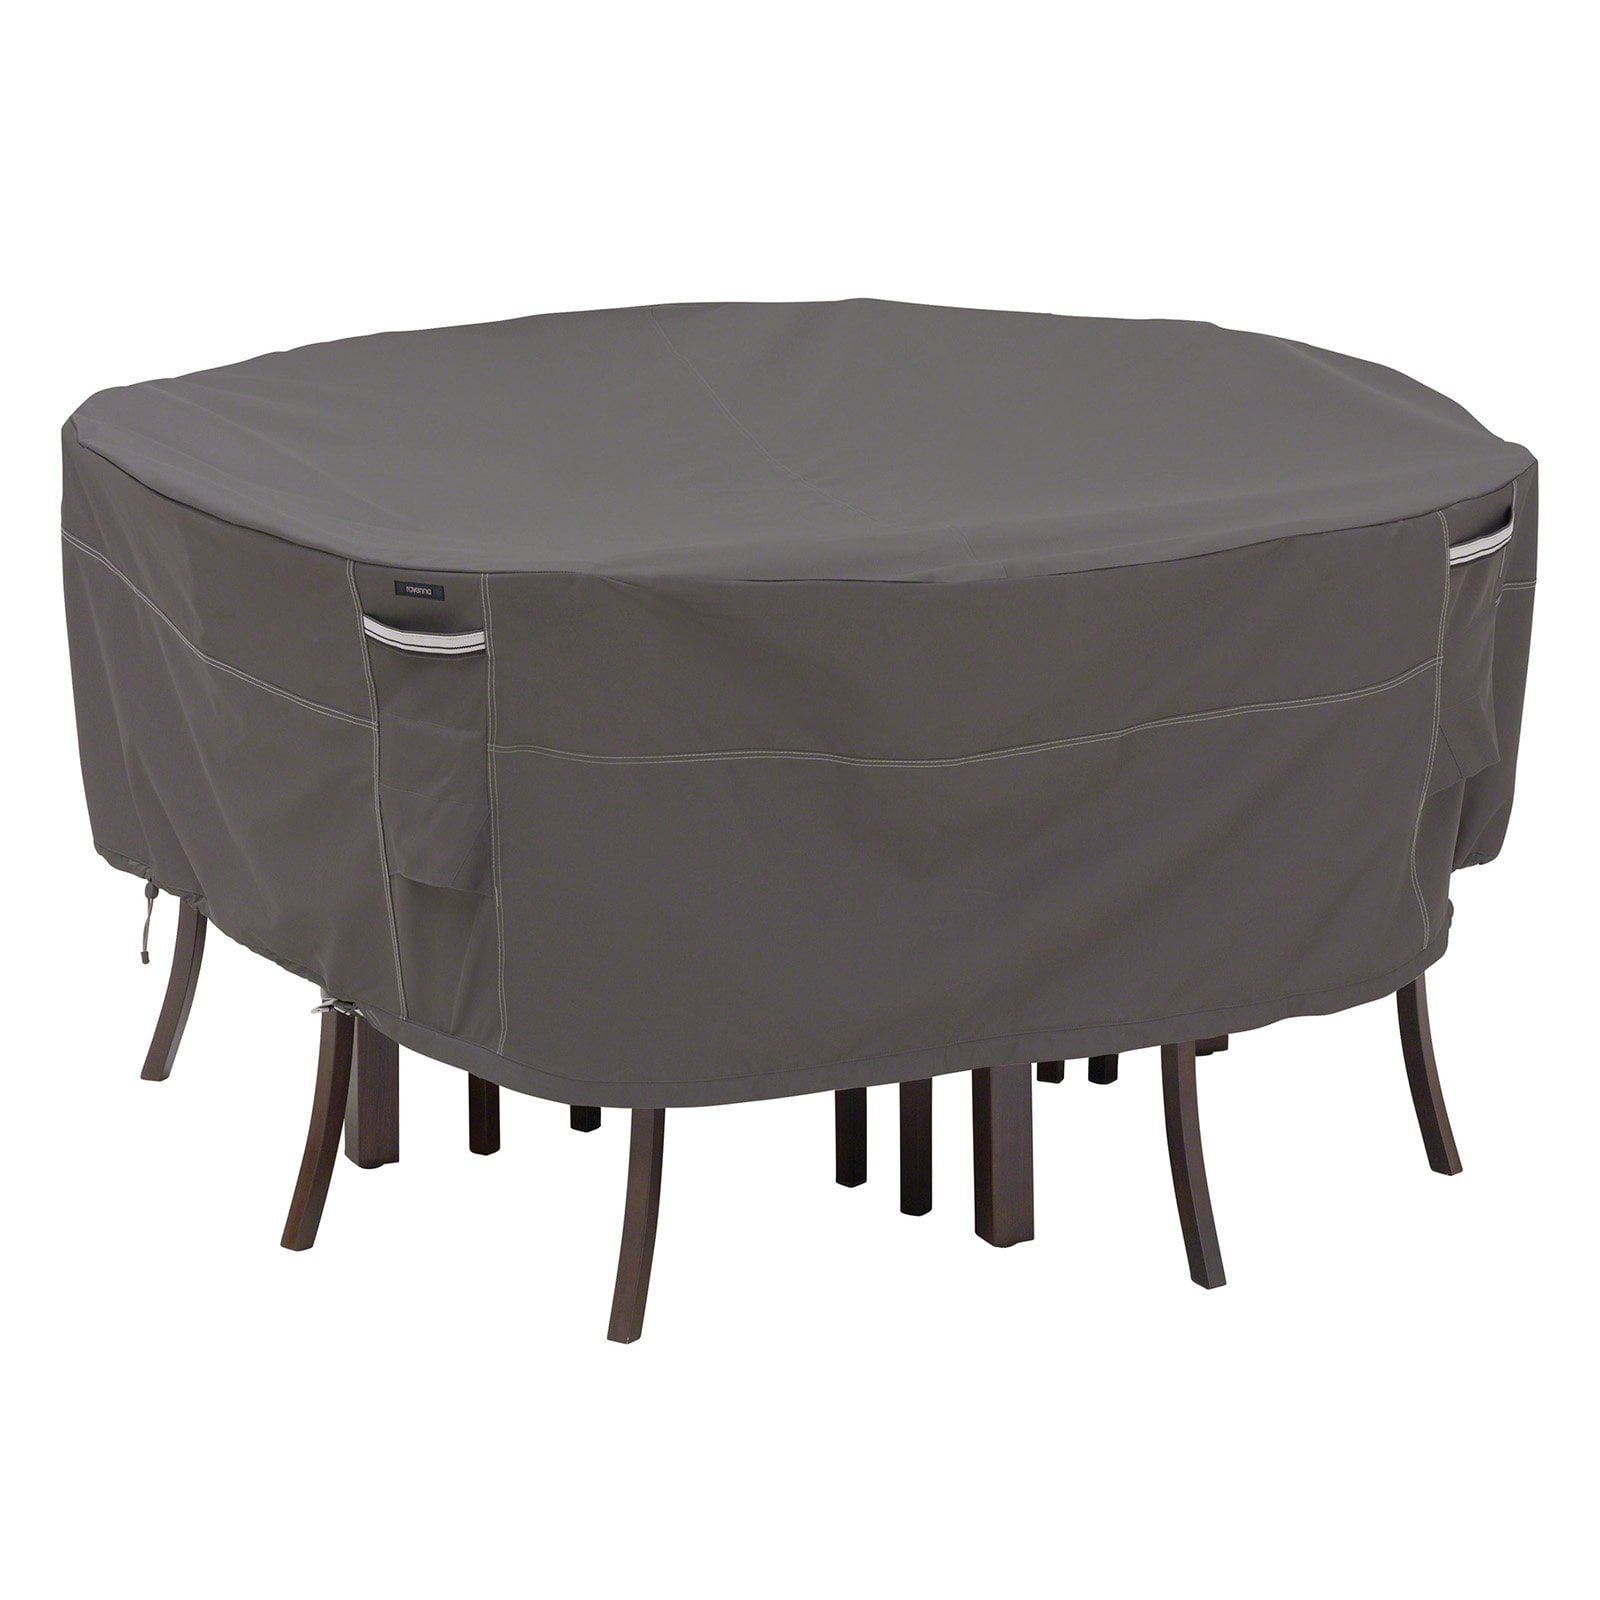 outdoor table covers 68x44